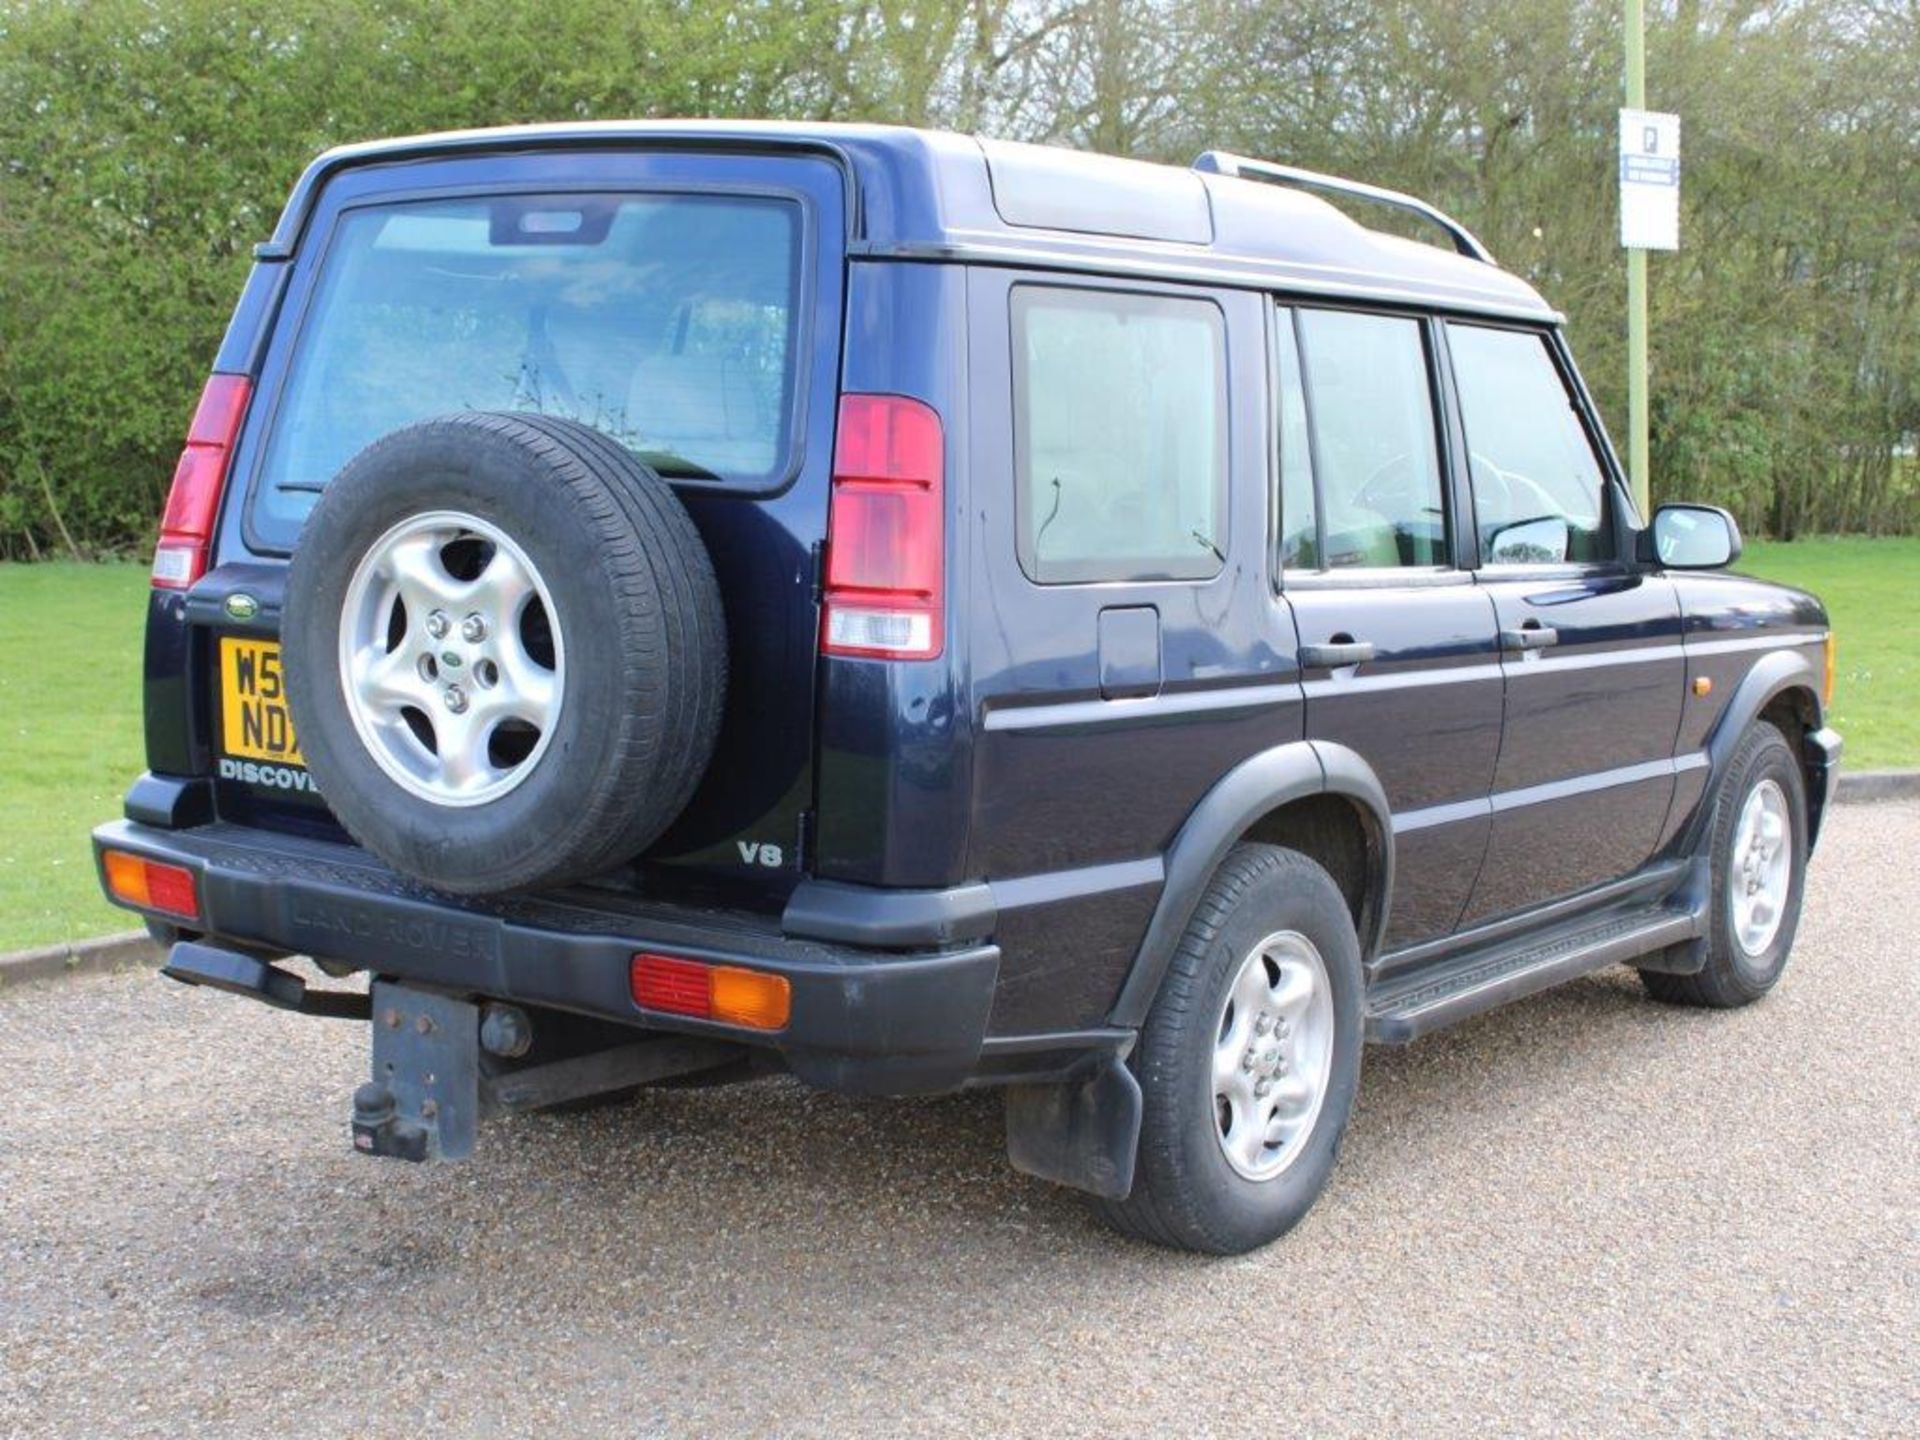 2000 Land Rover Discovery II V8 ES Auto - Image 6 of 14